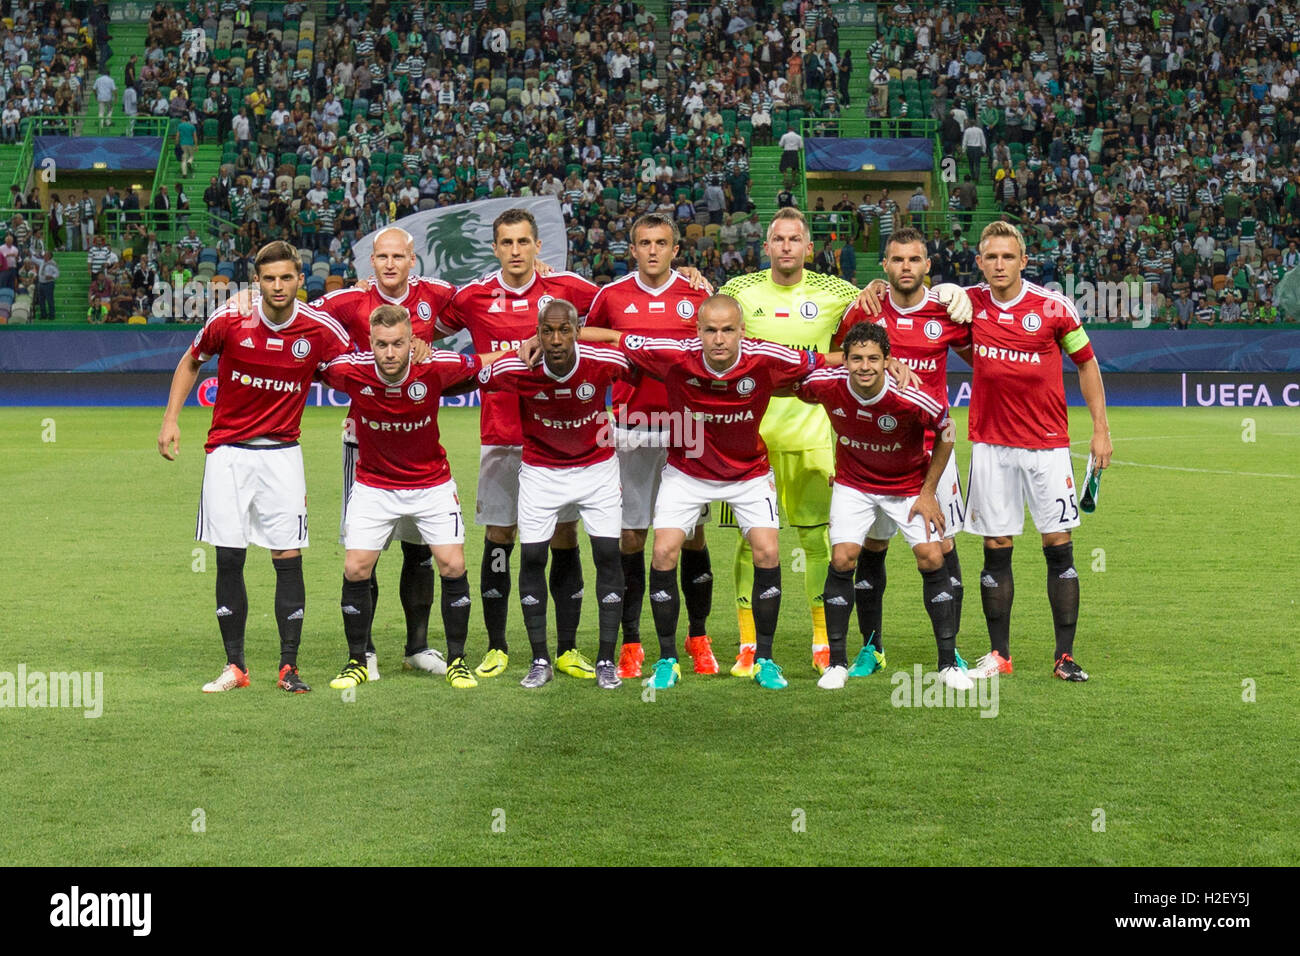 Lisbon, Portugal. 27th September, 2016. Legia Warszawa starting eleven for  the game of the UEFA Champions